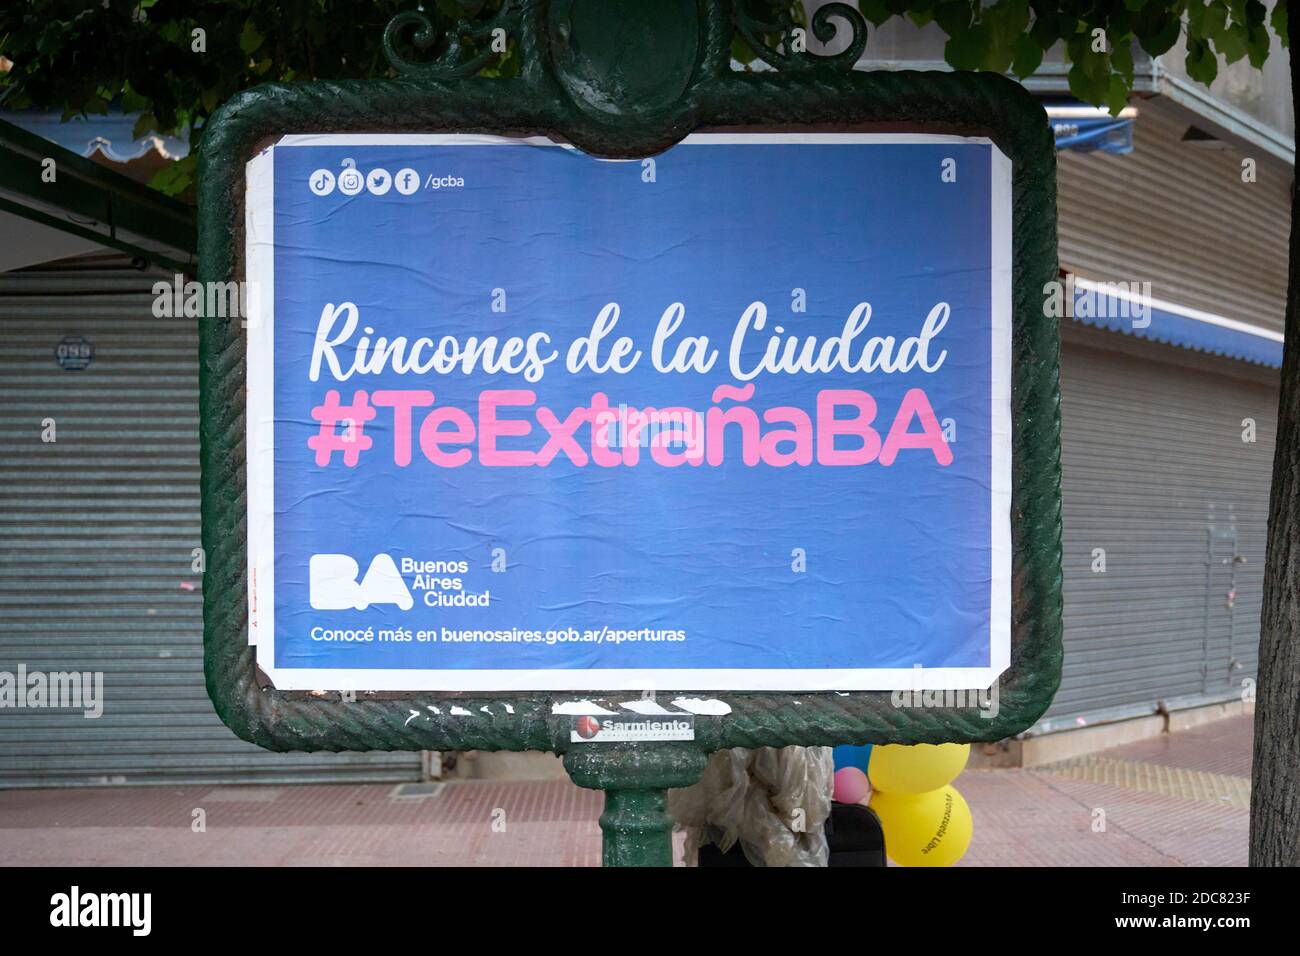 Buenos aires / Argentina; Nov 14, 2020: City government poster related to the return to normalcy after the confinement caused by the coronavirus pande Stock Photo